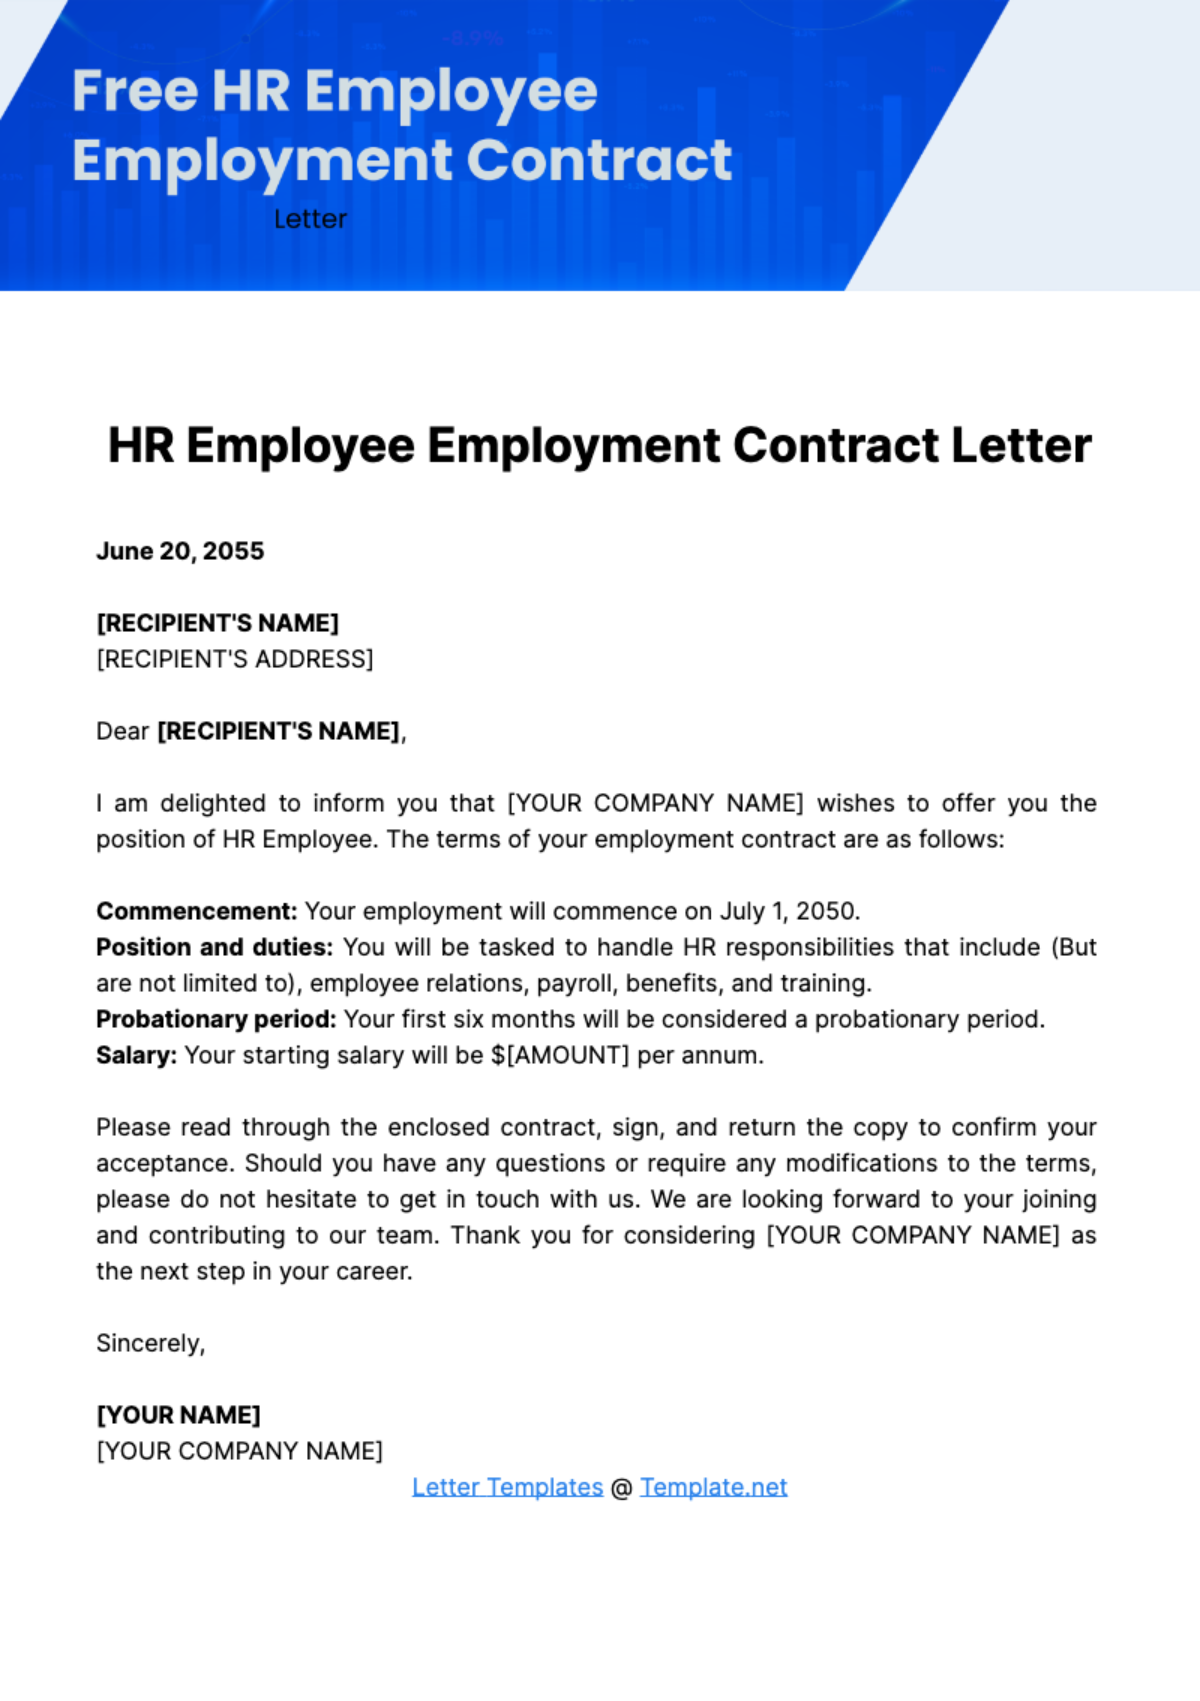 Free HR Employee Employment Contract Letter Template